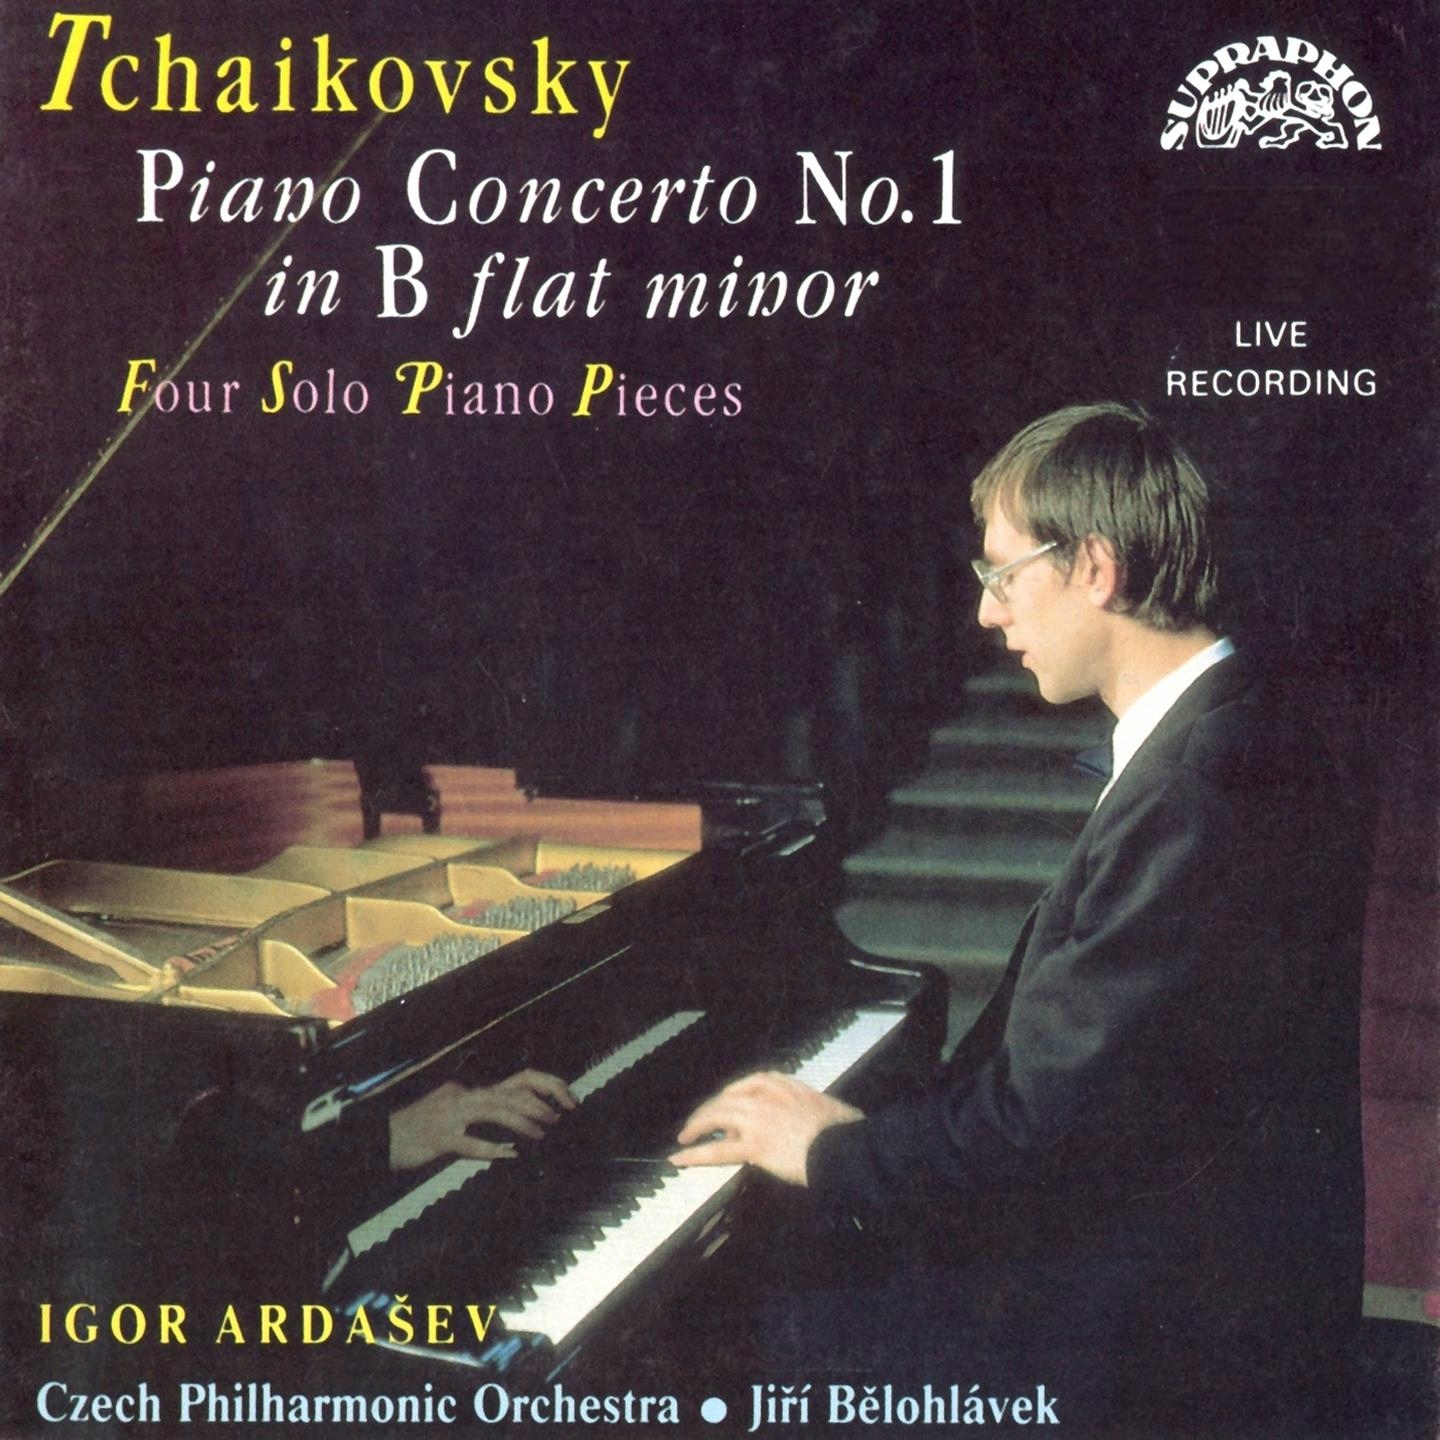 2 Pieces, Op. 10, TH 132: No. 1 in F Major, Nocturne. Andante cantabile